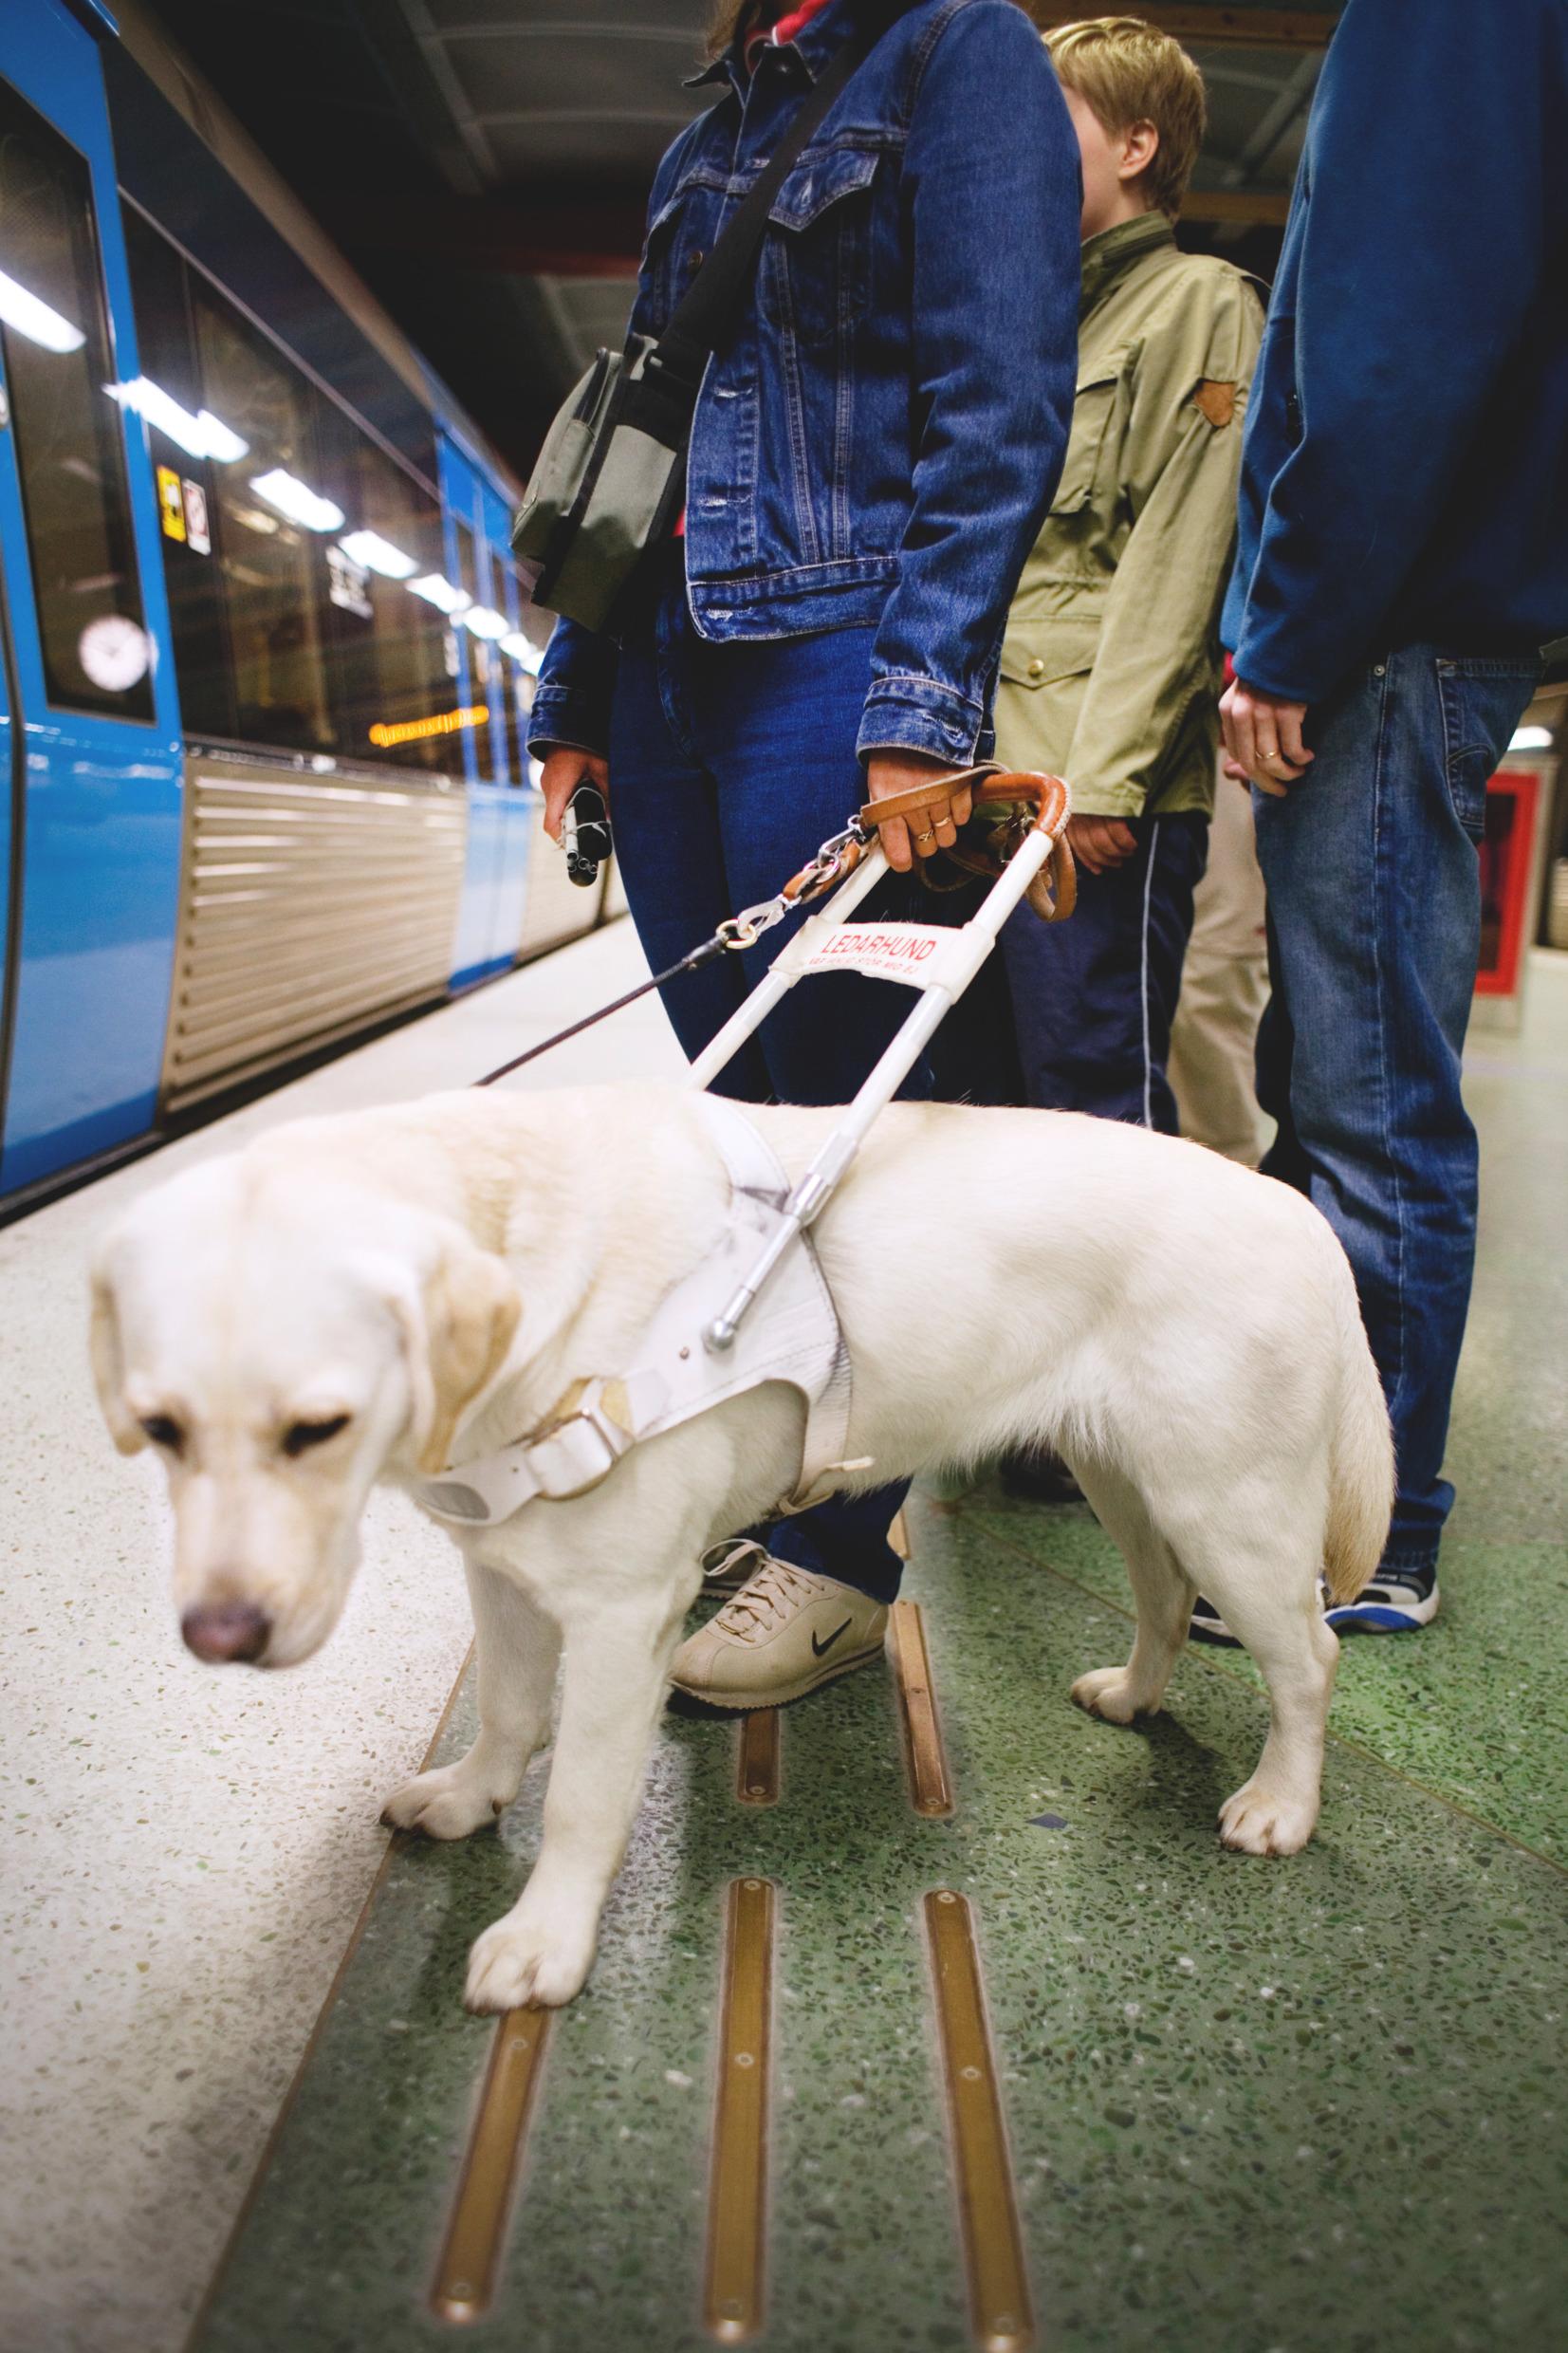 A guide dog held in a leash on a subway plattform in Stockholm.